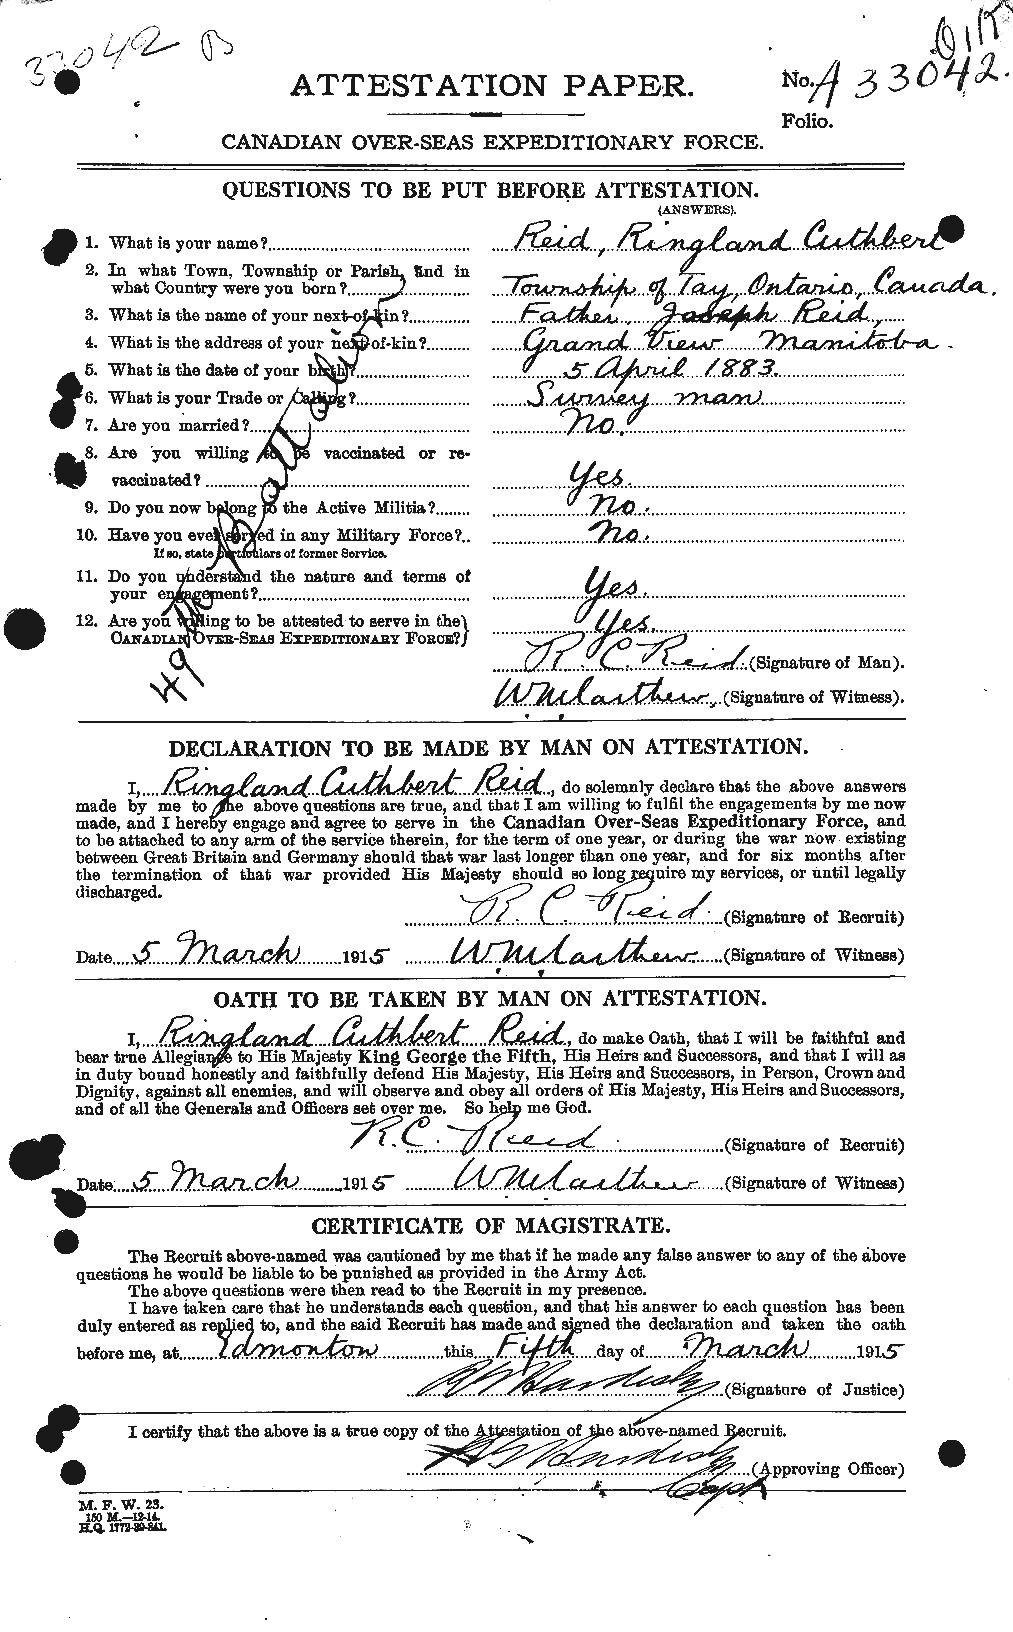 Personnel Records of the First World War - CEF 601862a